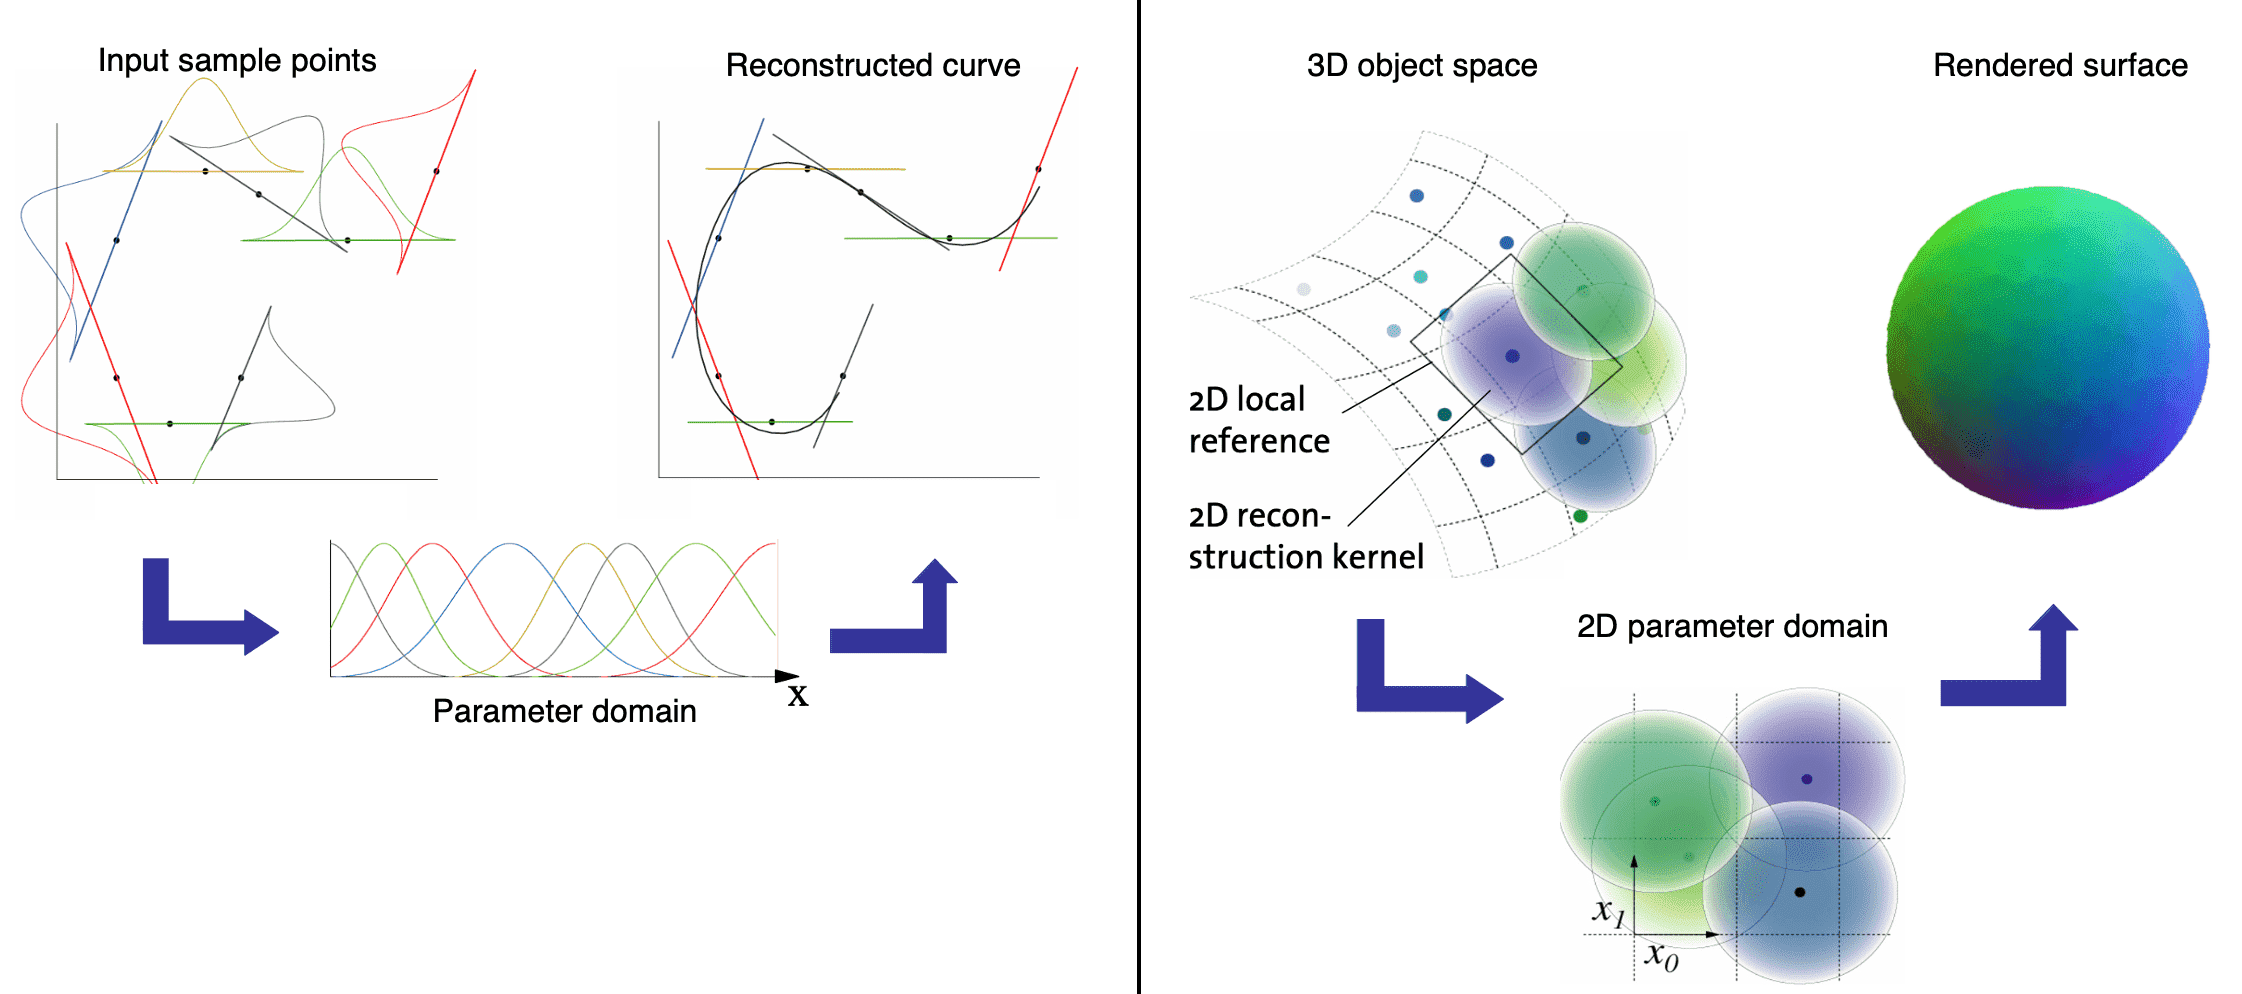 Equivalence between parameterized signal reconstruction and surface splatting